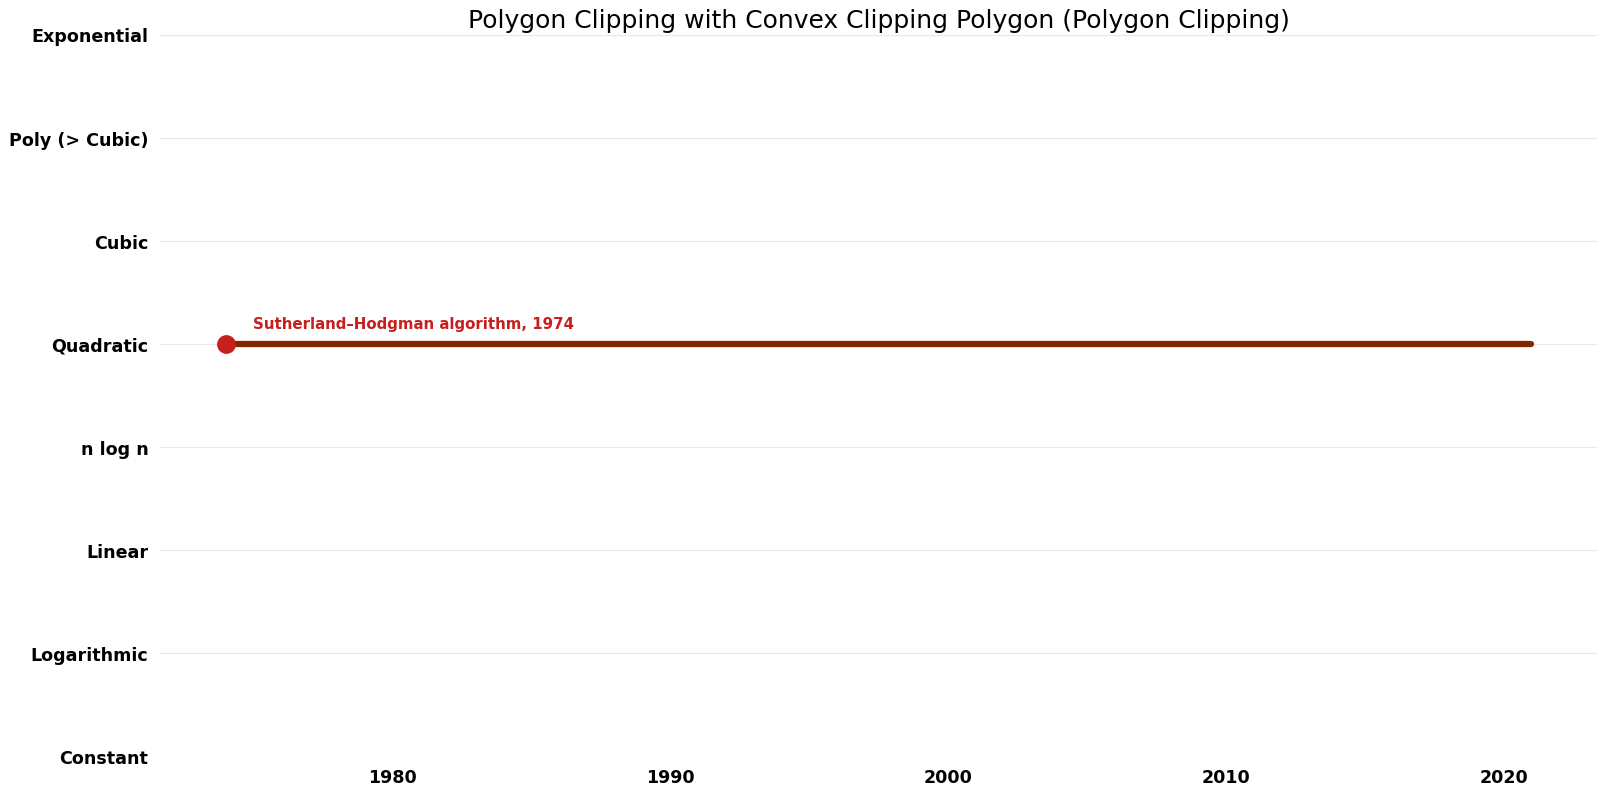 File:Polygon Clipping - Polygon Clipping with Convex Clipping Polygon - Time.png